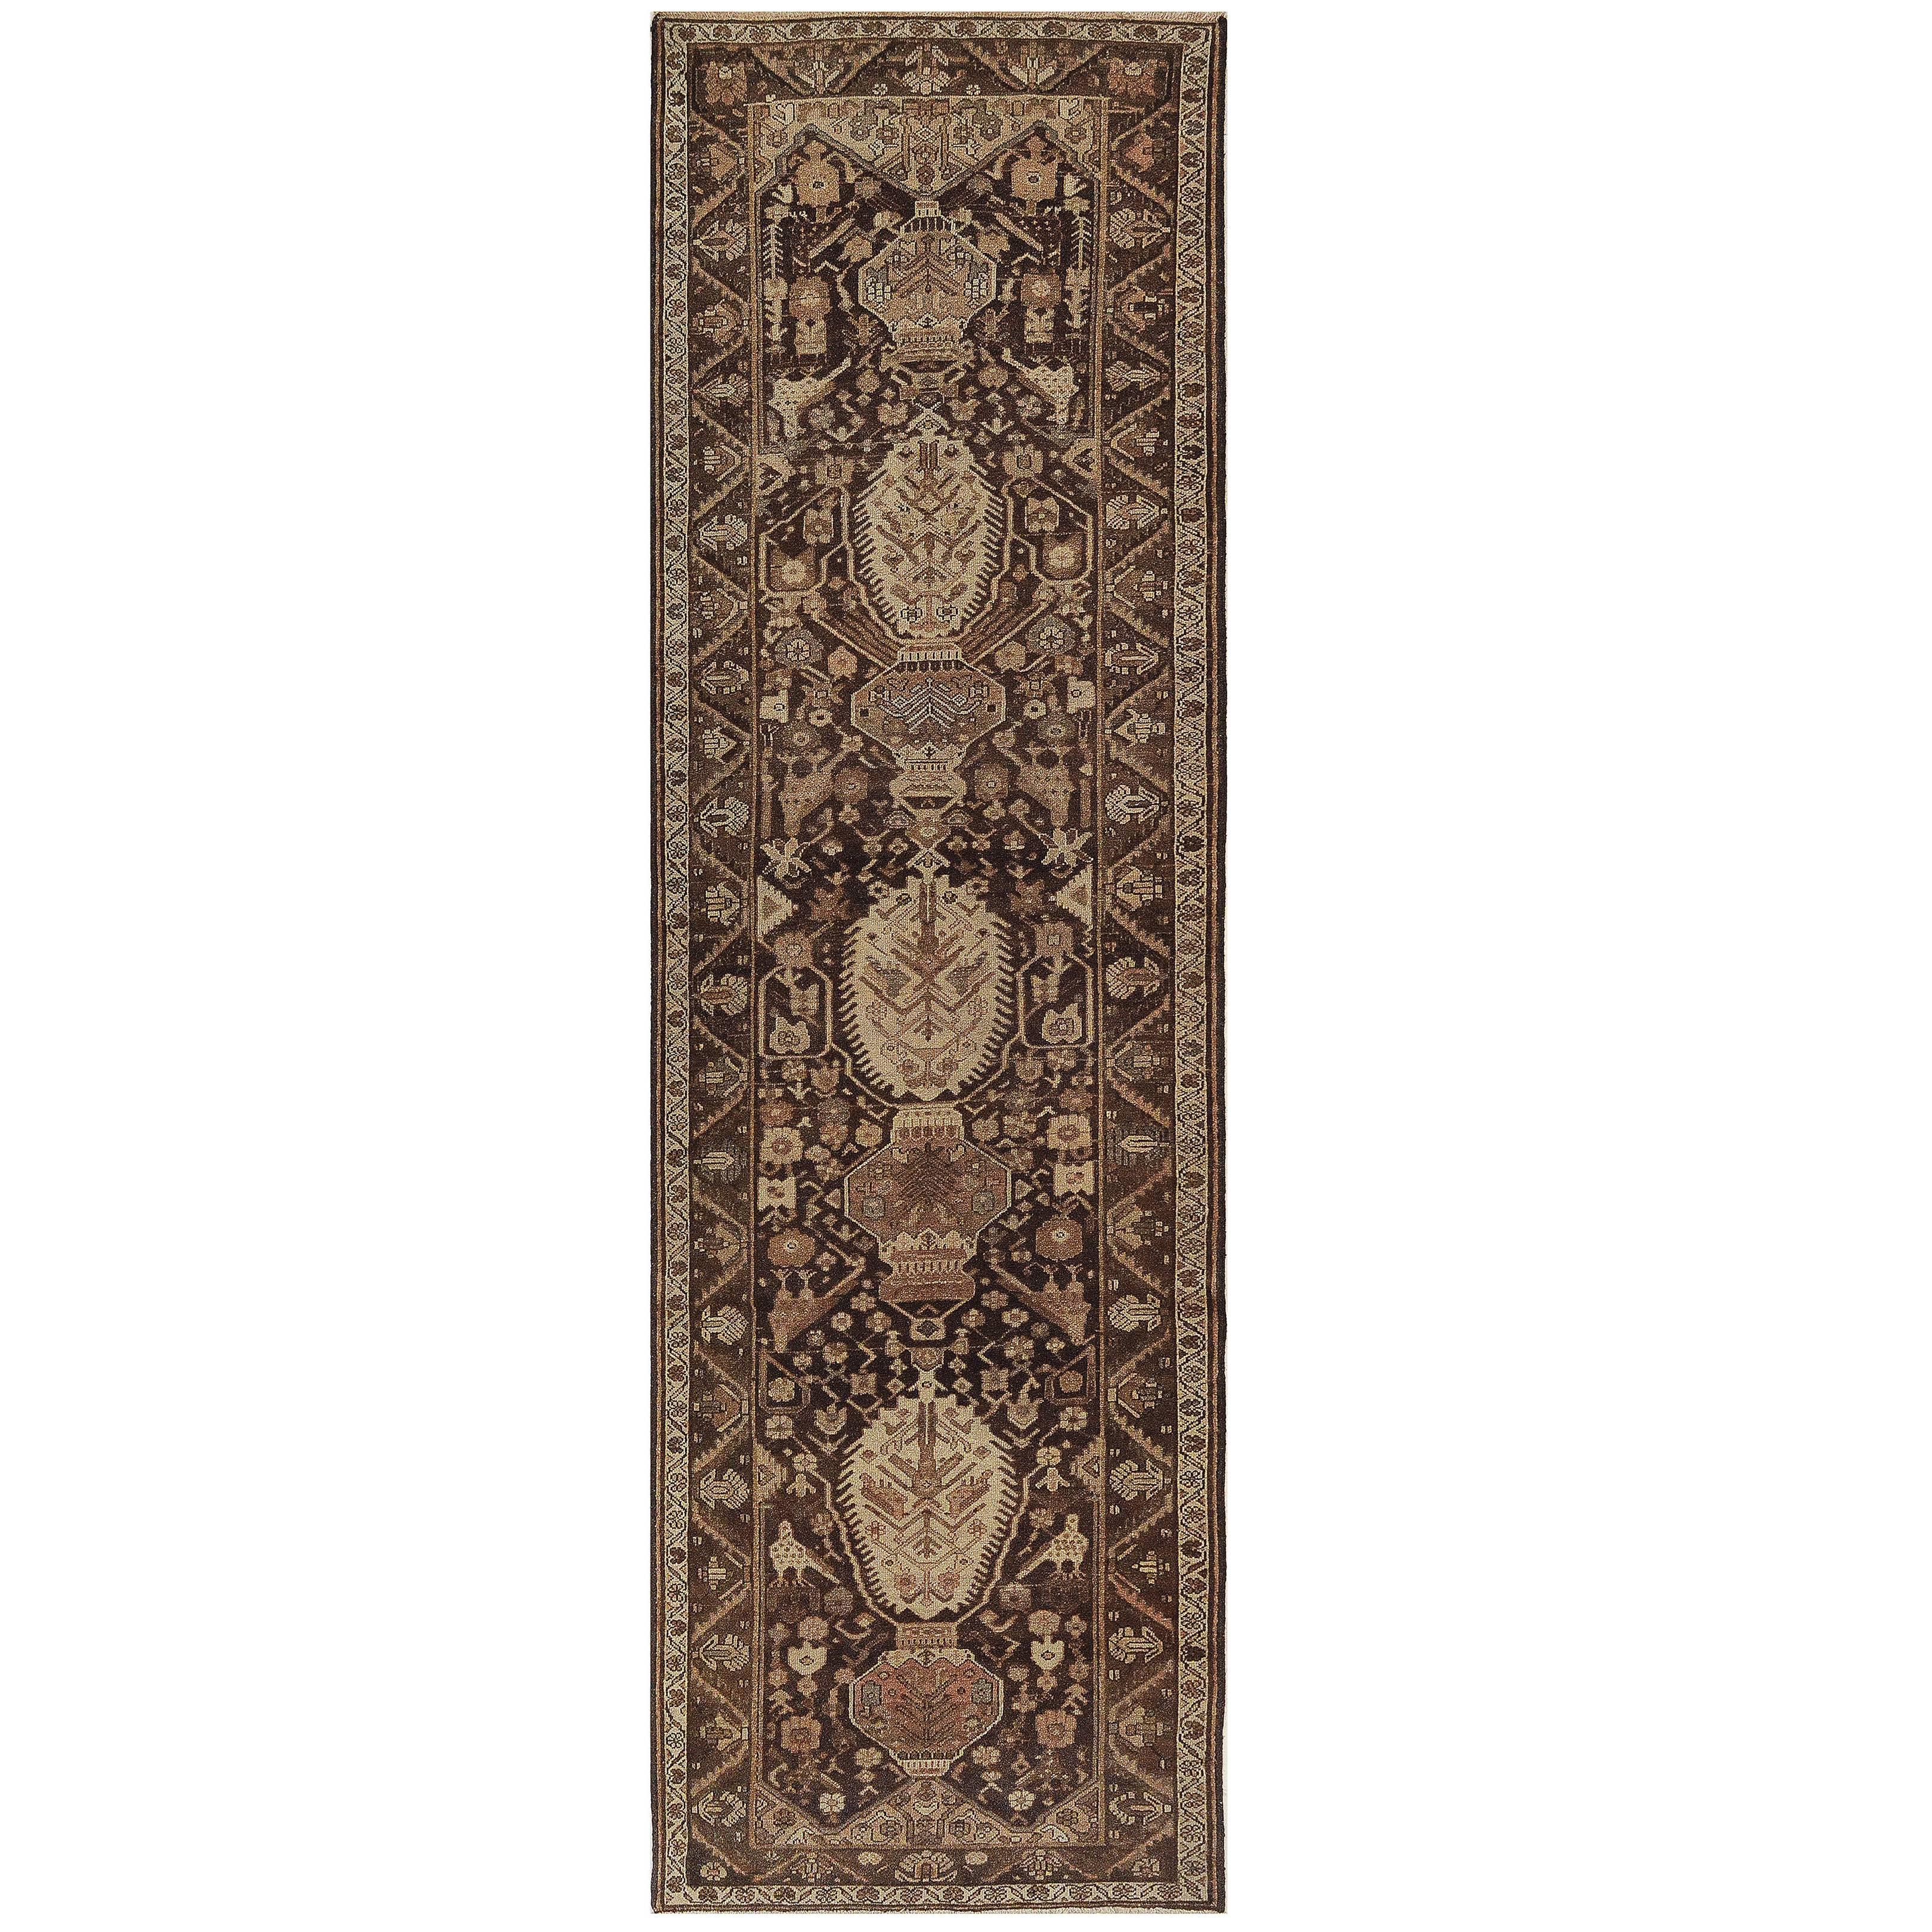 Early 20th Century Bakhtiari Rug from Central Persia For Sale